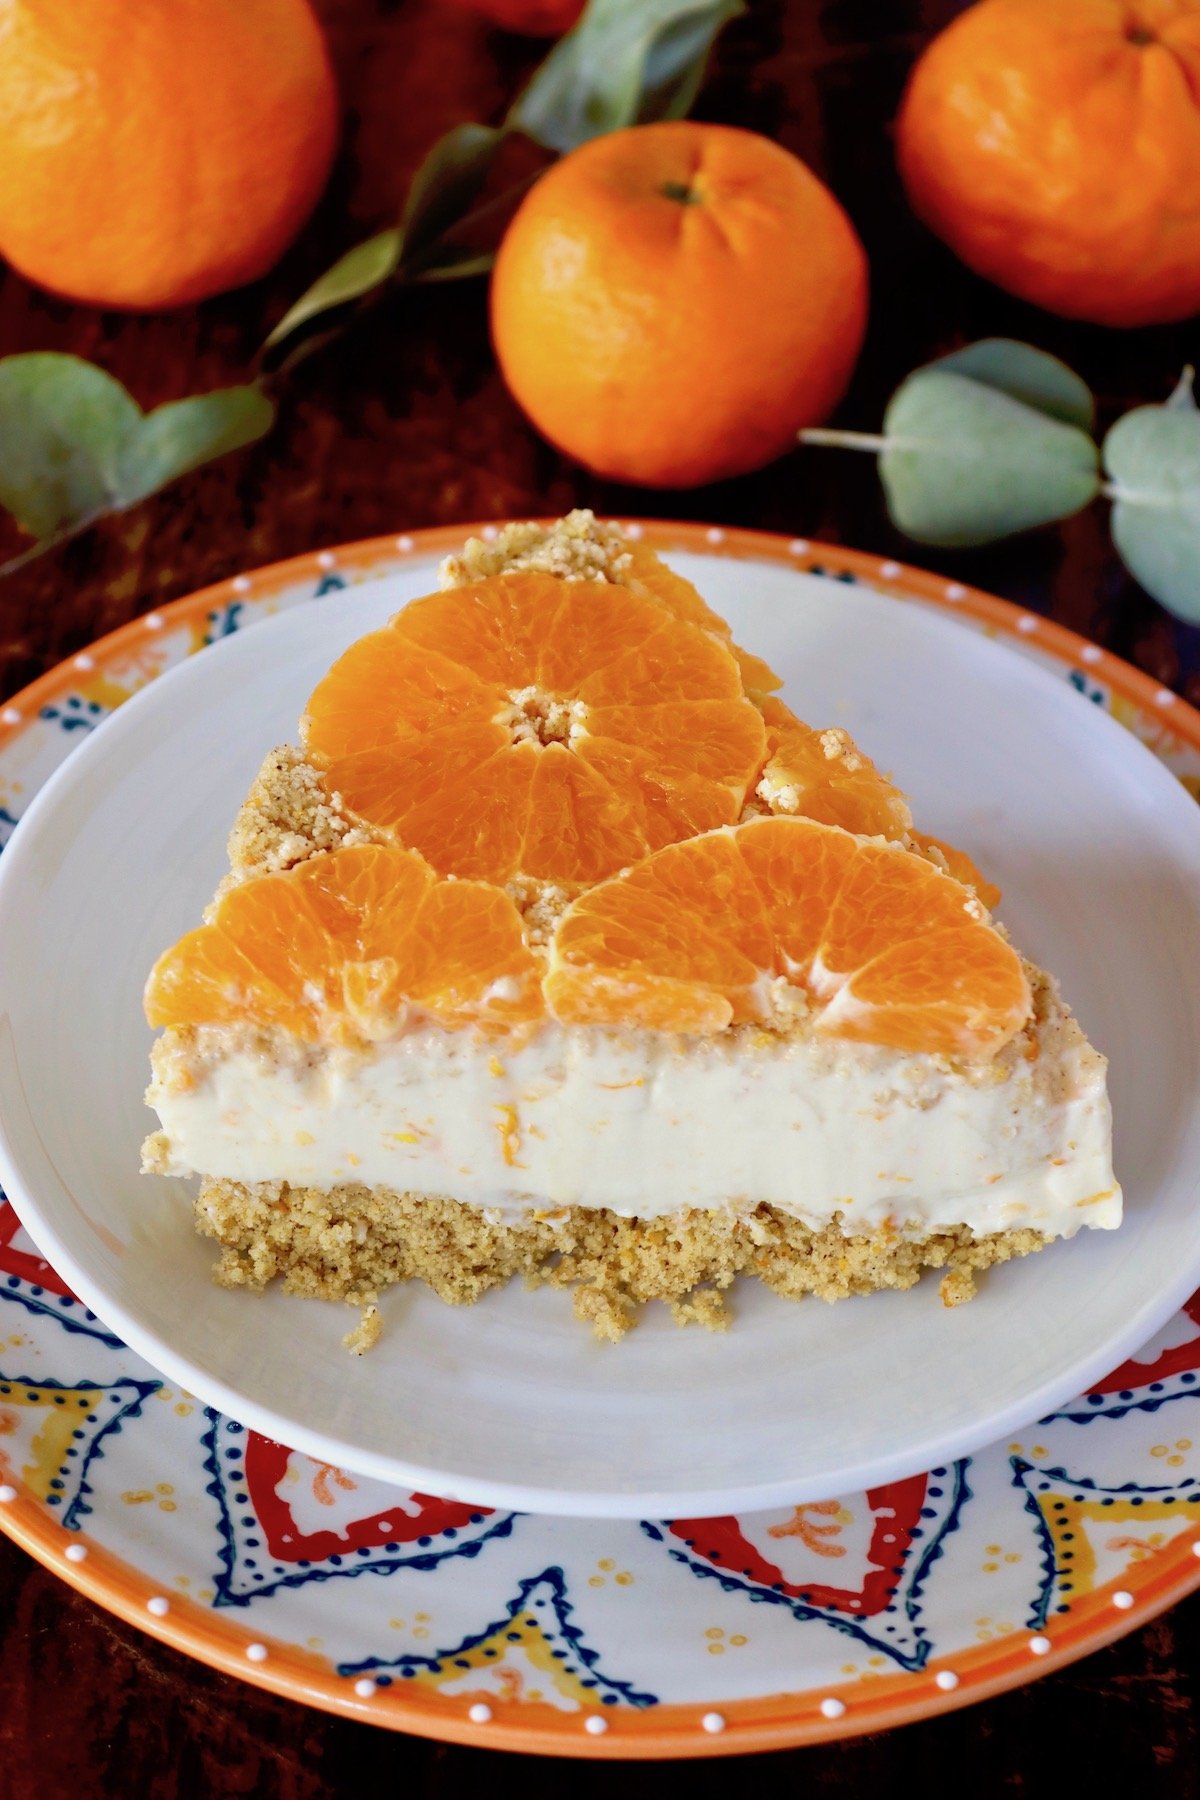 One slice of tangerine cheesecake on a white plate with an orange-rimmed plate beneath it.